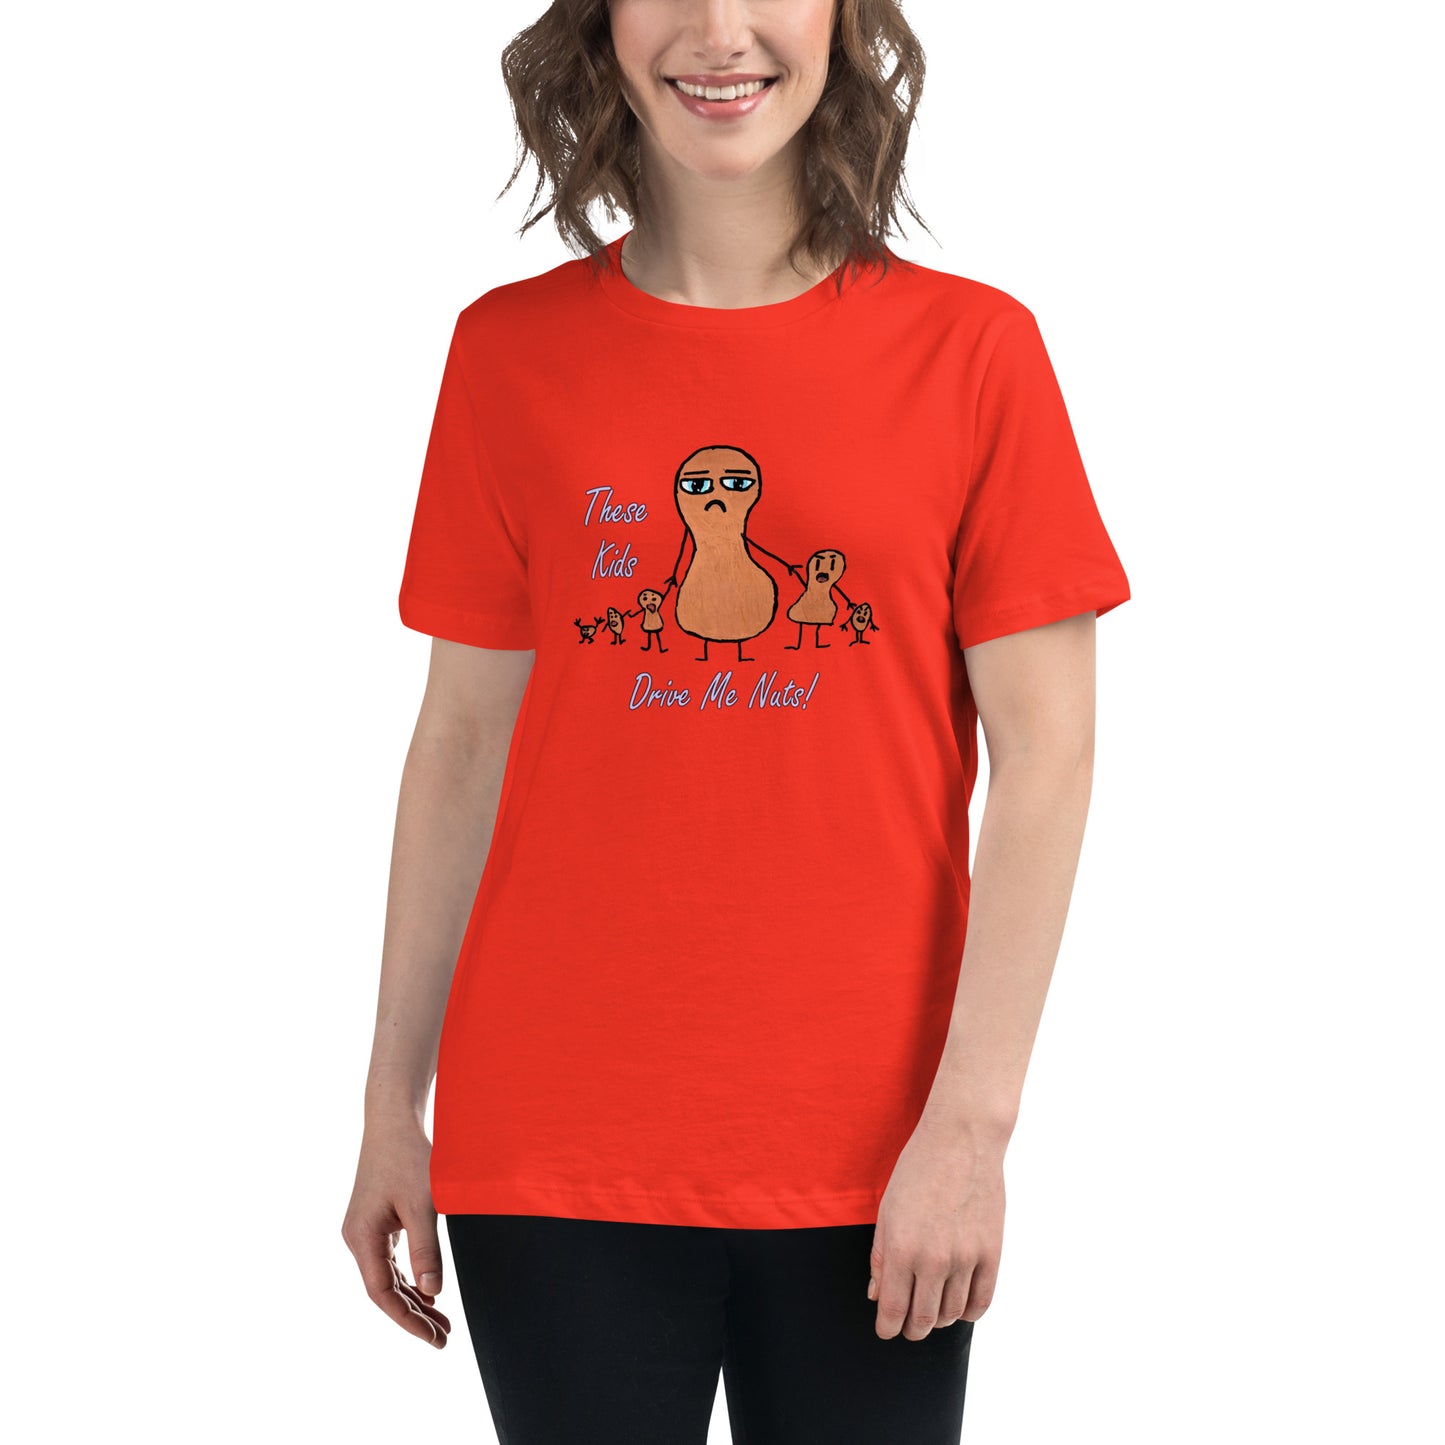 Collection by Audrie (Women's Relaxed T-Shirt) - "These Kids Drive Me Nuts" HD